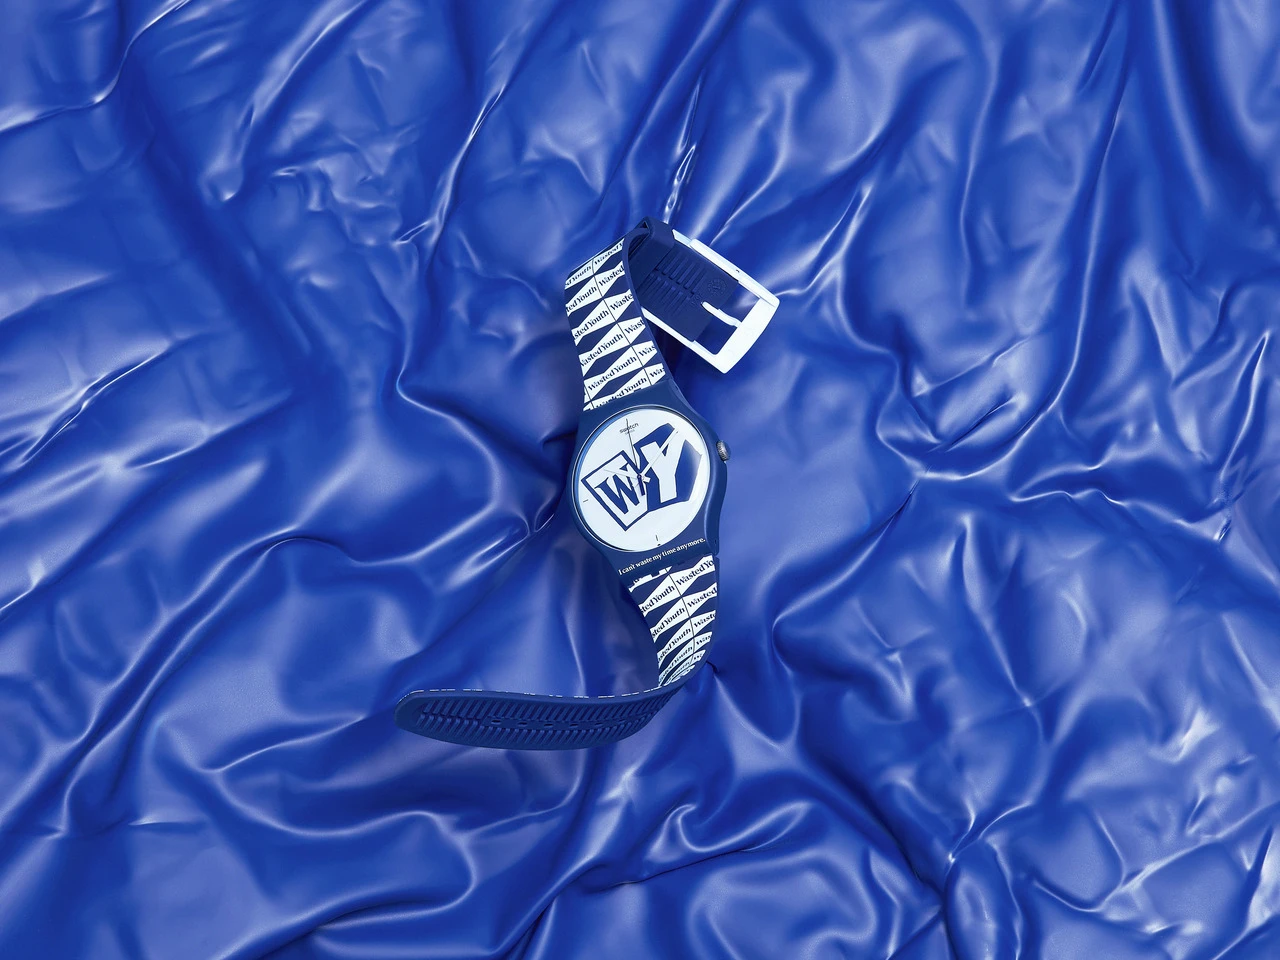 A blue resistance band with white zebra stripes and a white logo on a crinkled blue gym mat background.